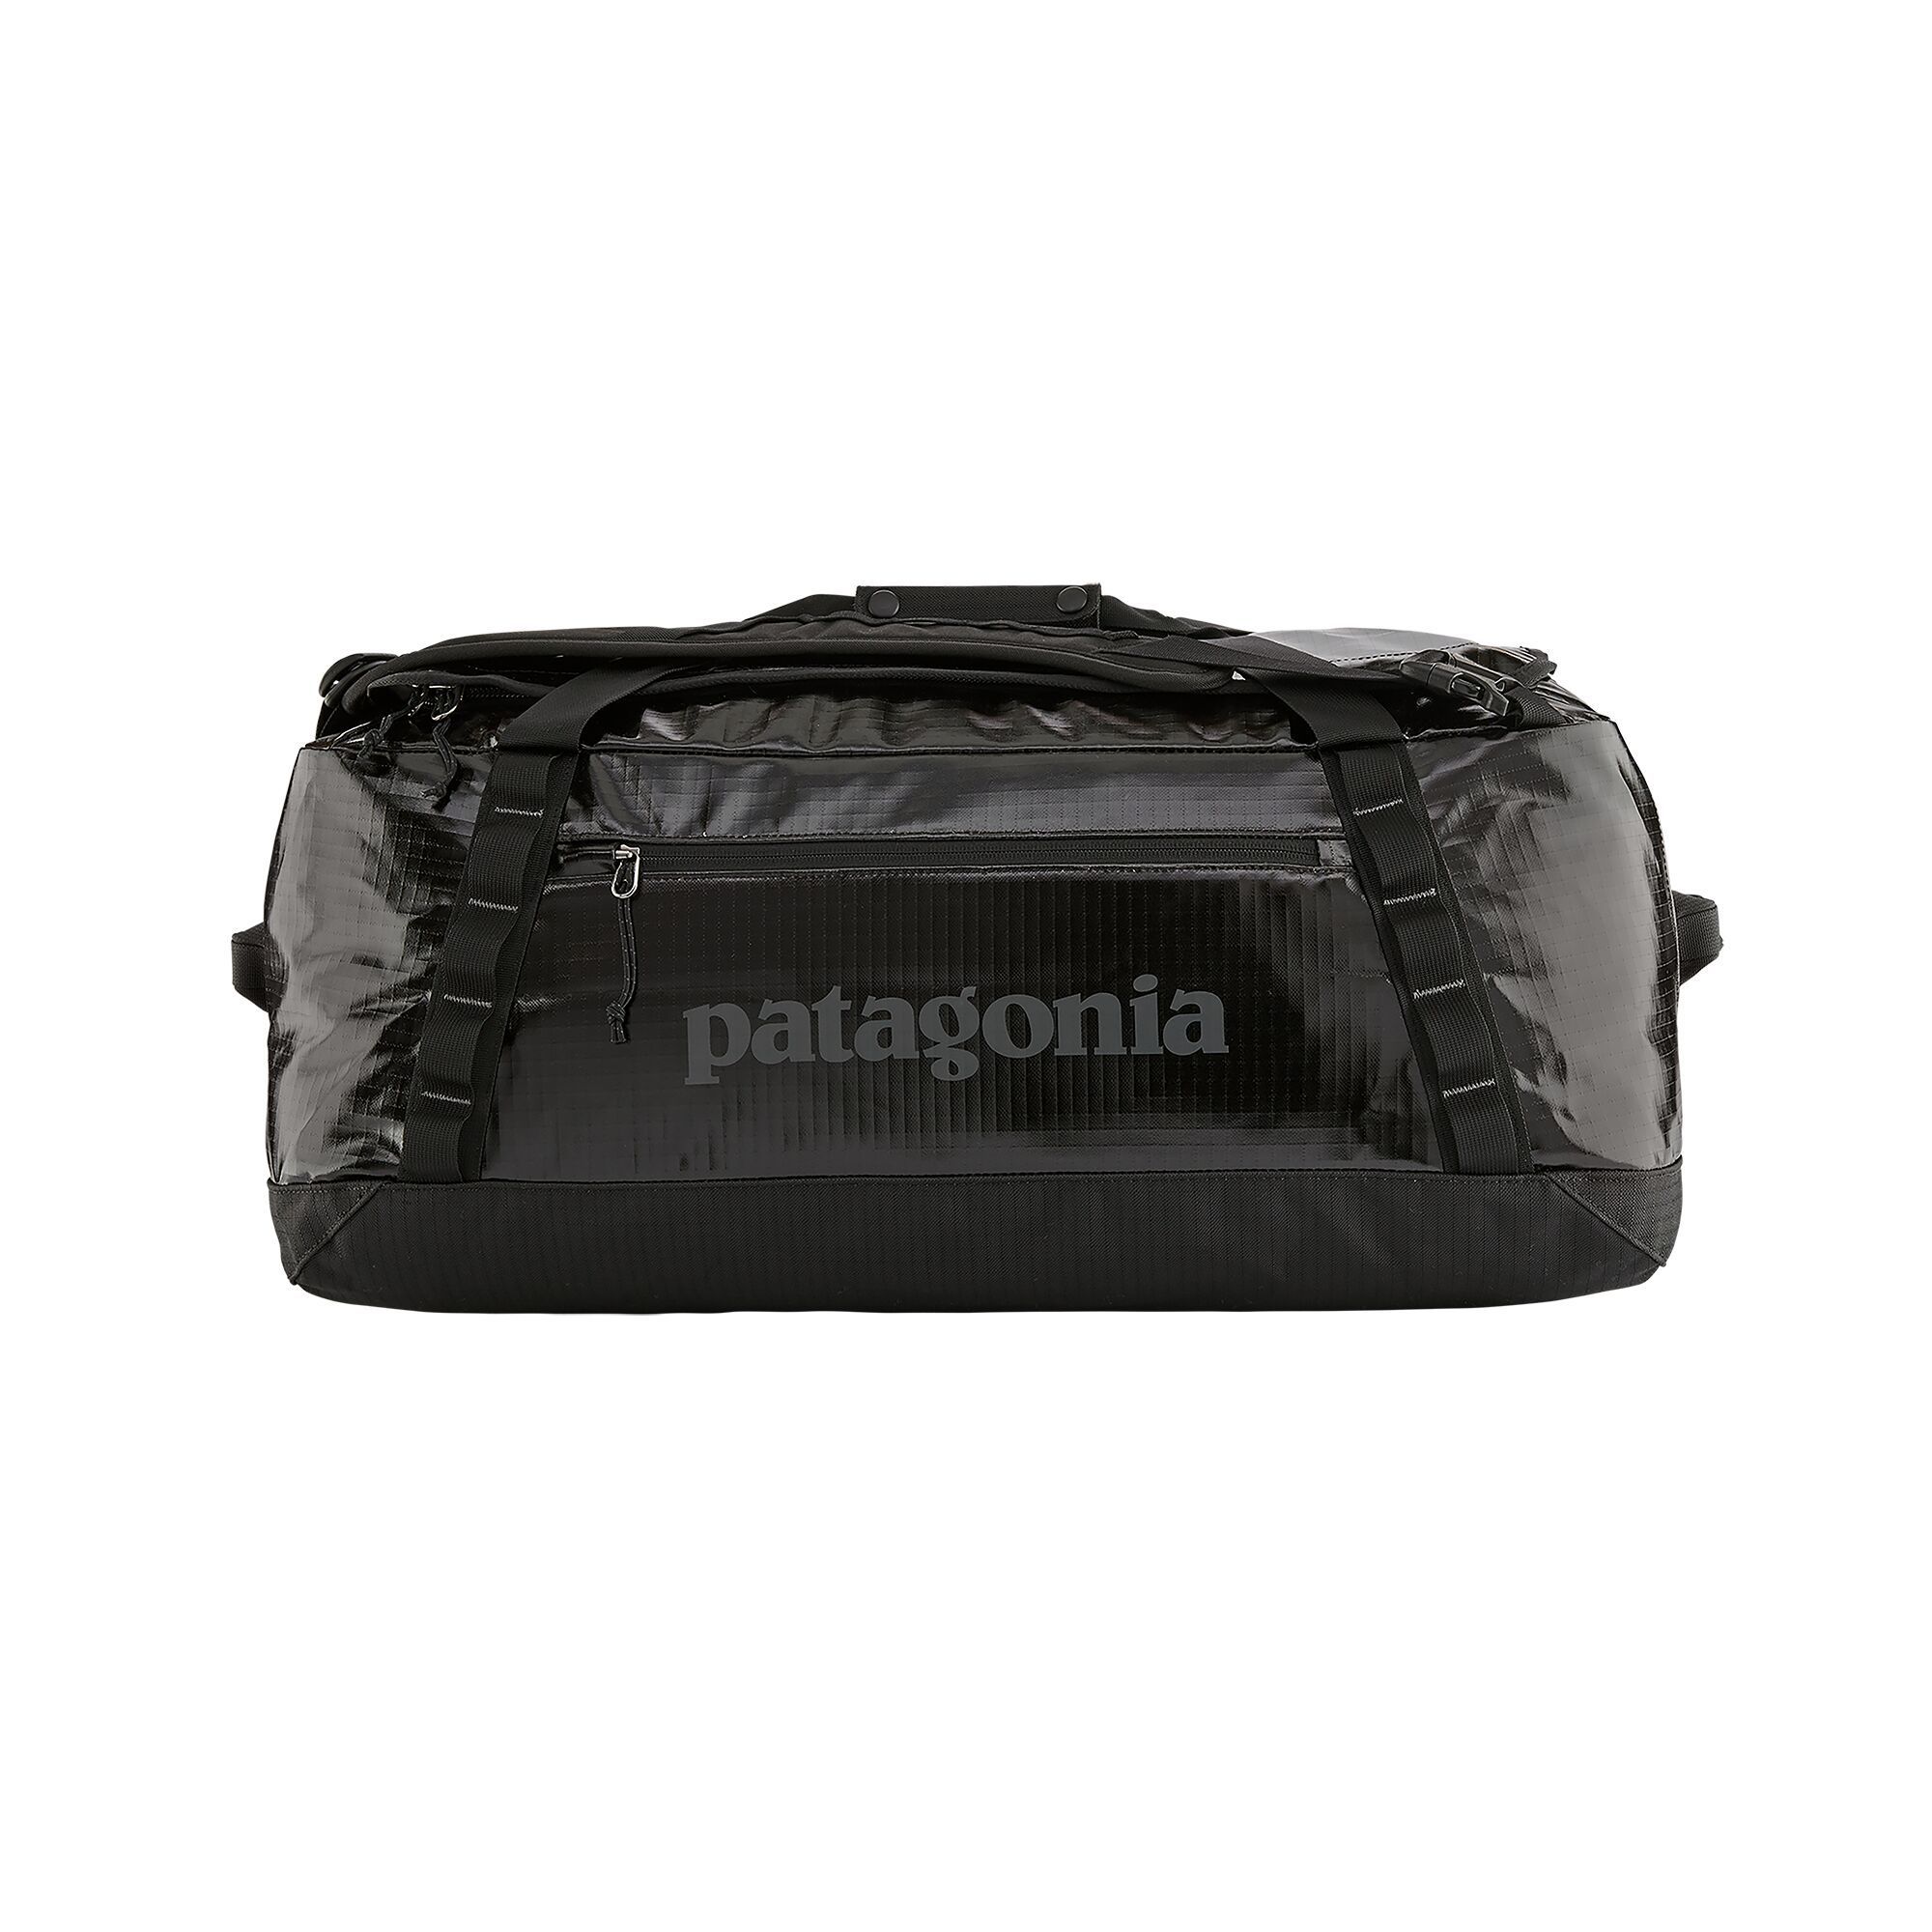 Patagonia Black Hole Duffel Bag 55L - 100 % Recycled Polyester, Black